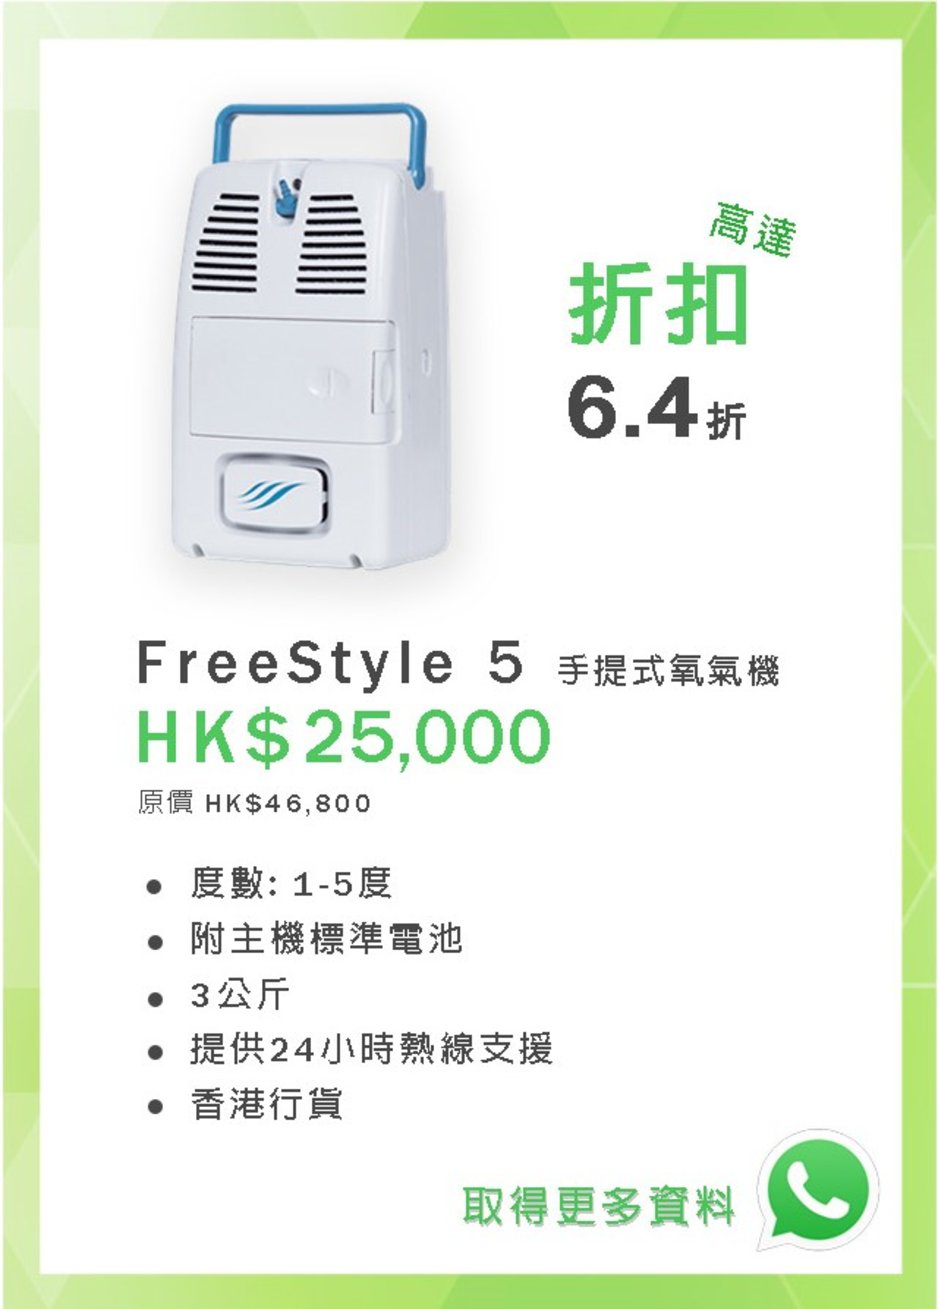 POC, oxygen therapy, Simplygomini, 氧氣機, Freestyle5